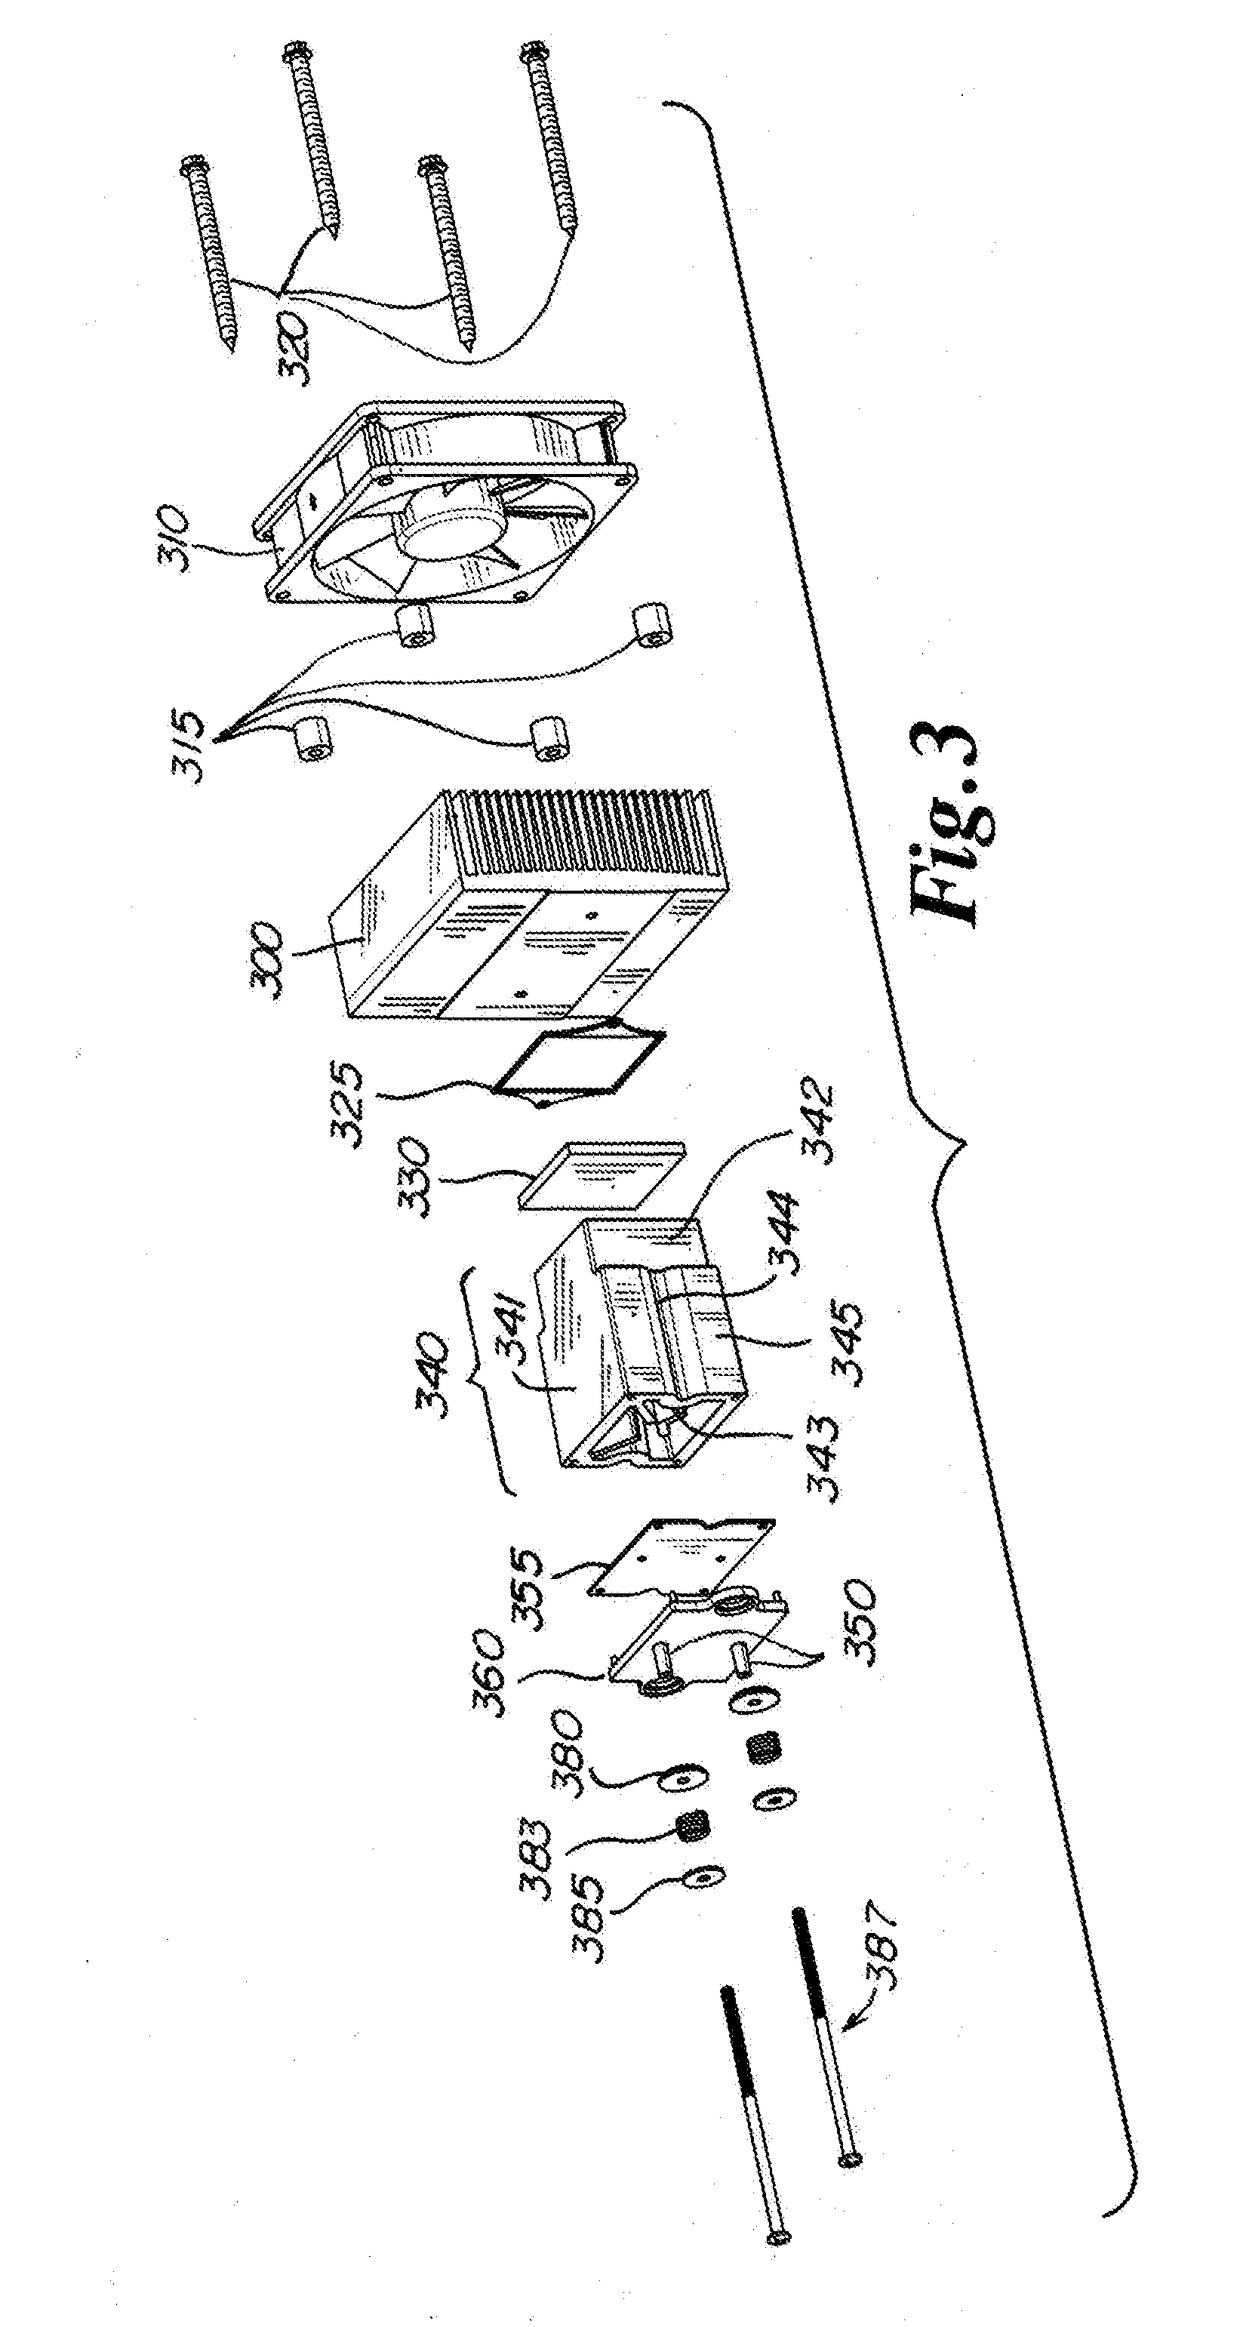 Thermal therapy device for providing controlled heating and cooling via an applied tissue interacting device